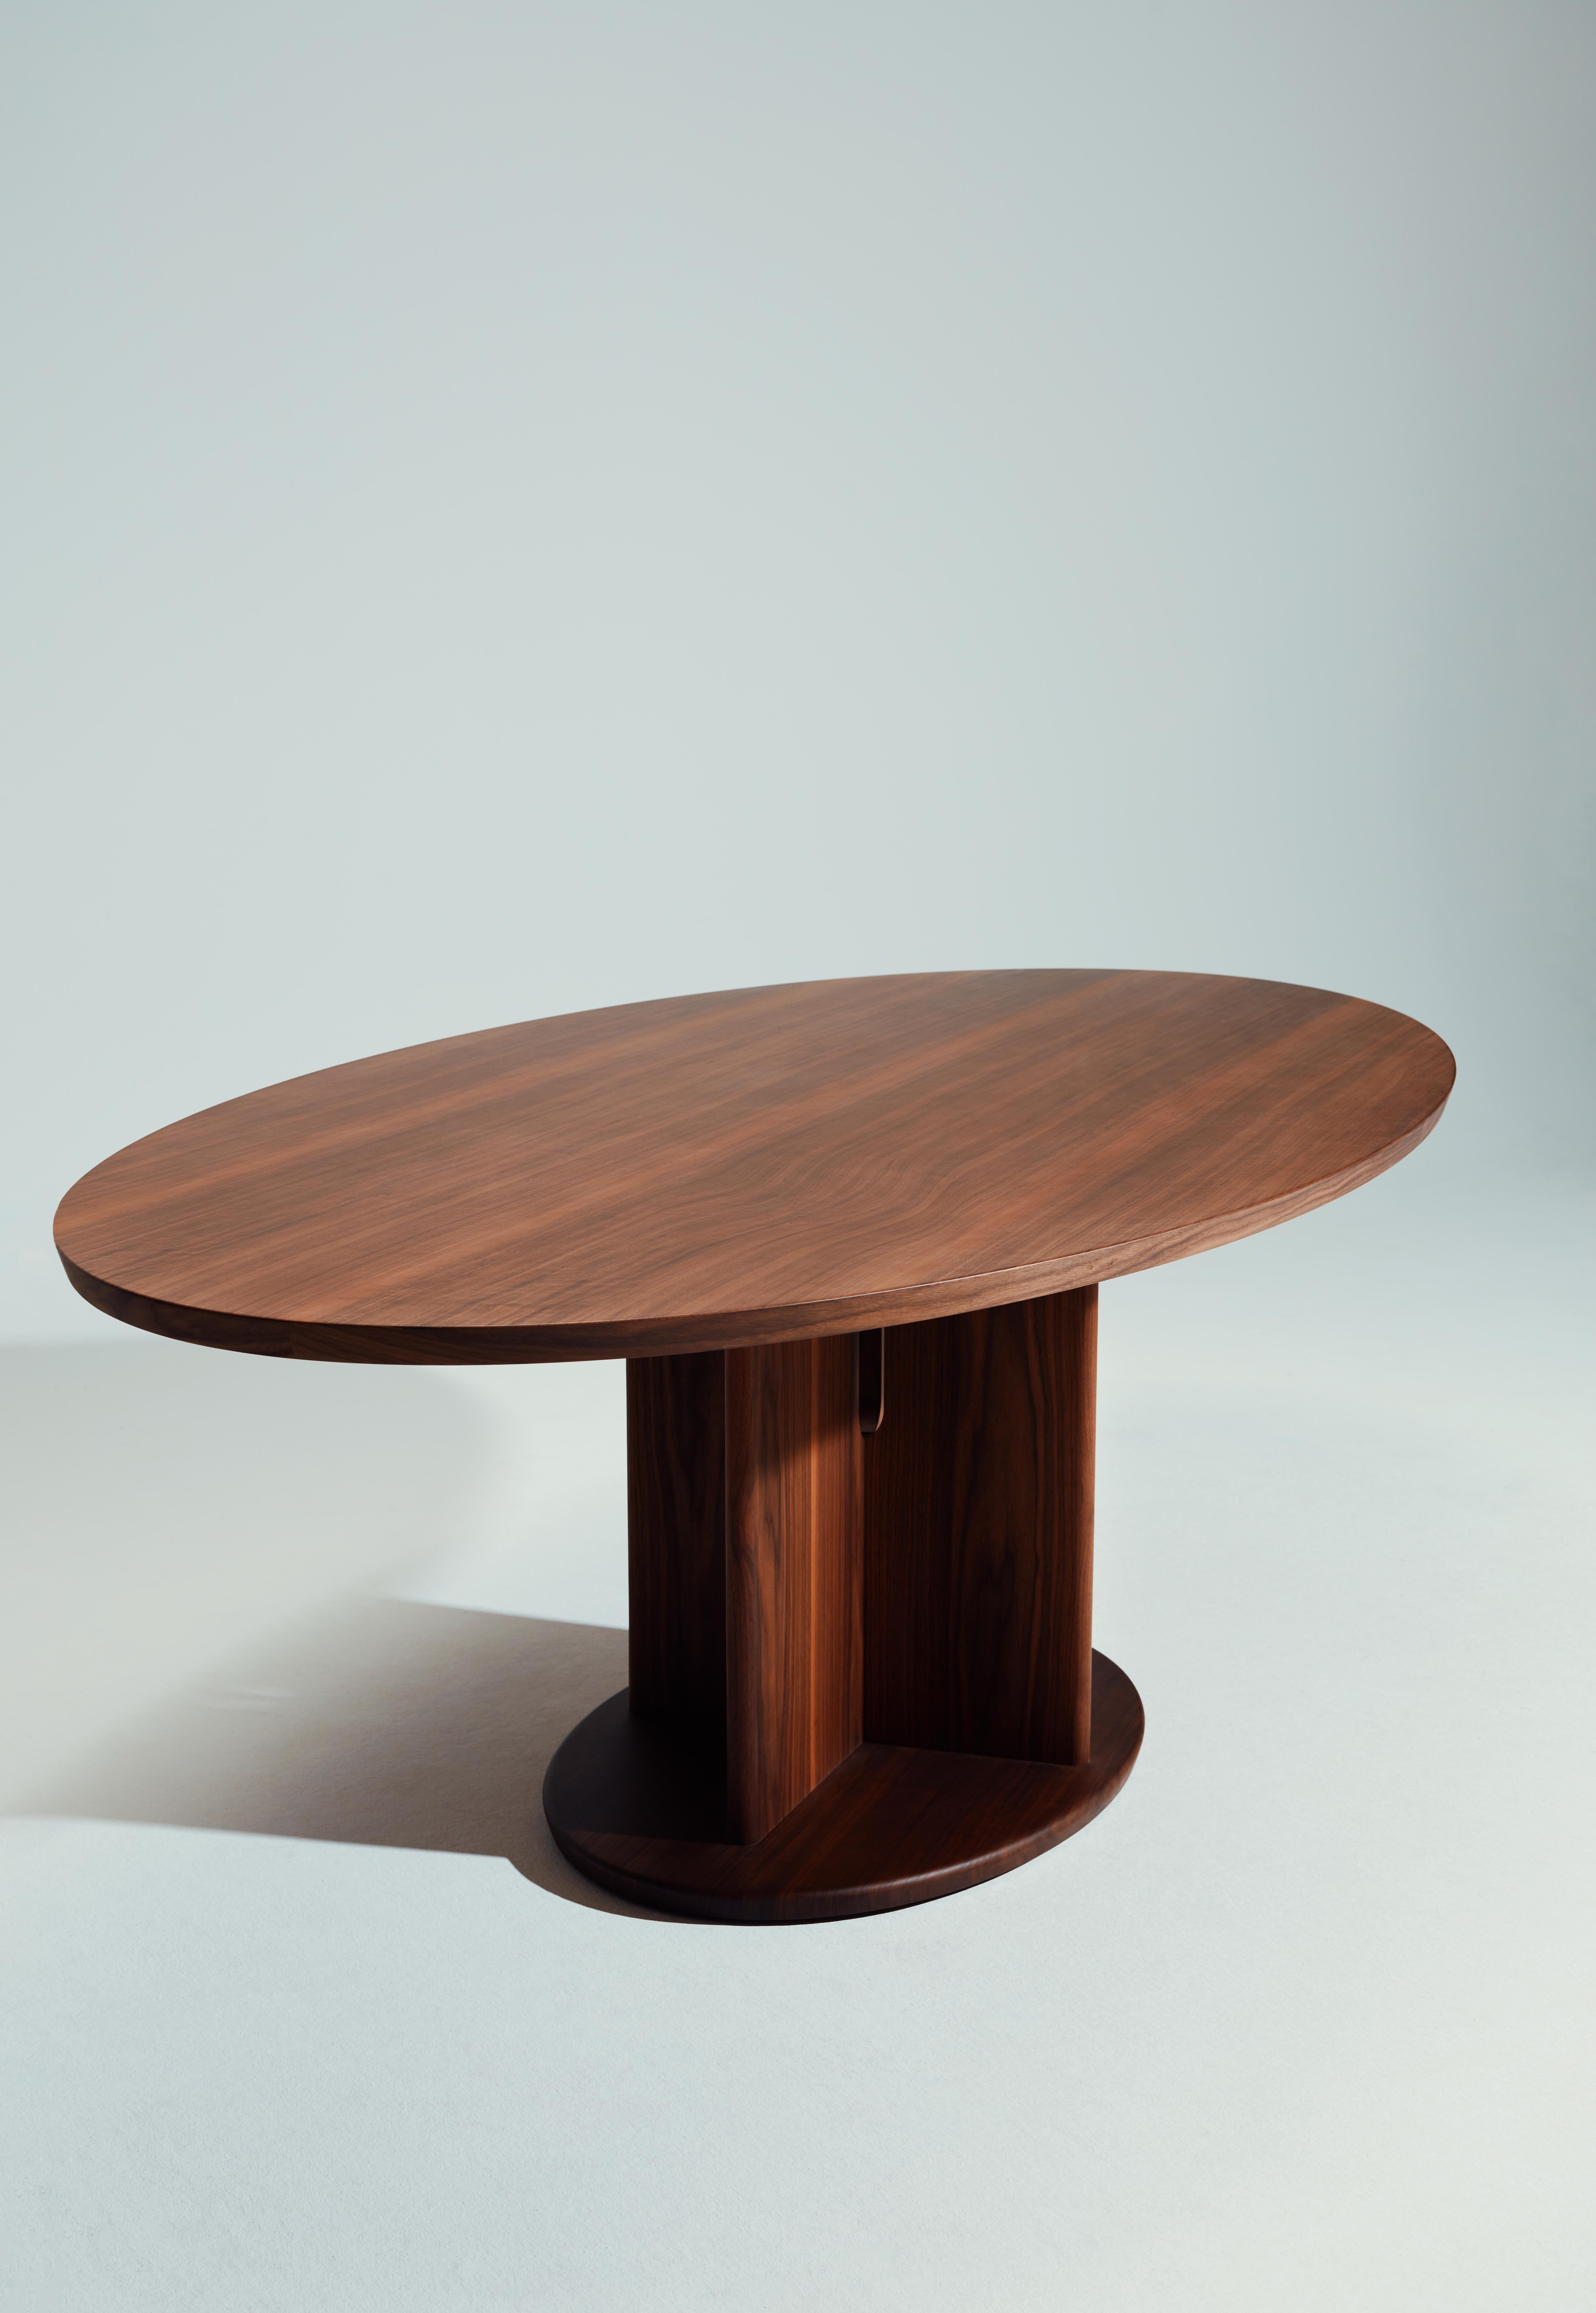 French Intersection Oval Table by Neri&Hu For Sale